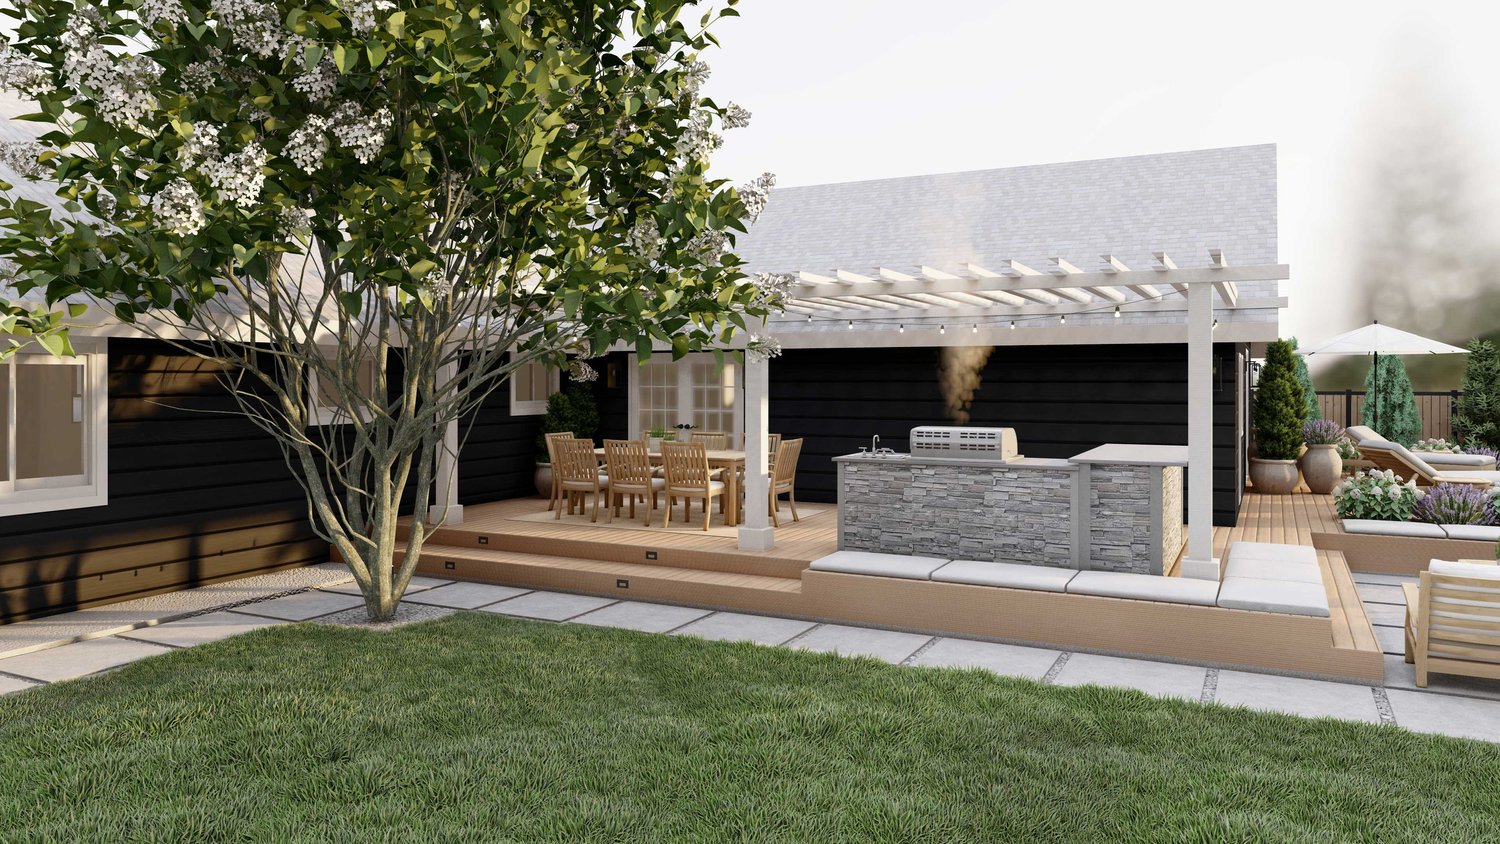 Twin Falls backyard showing deck patio with pergola over outdoor kitchen and dining area